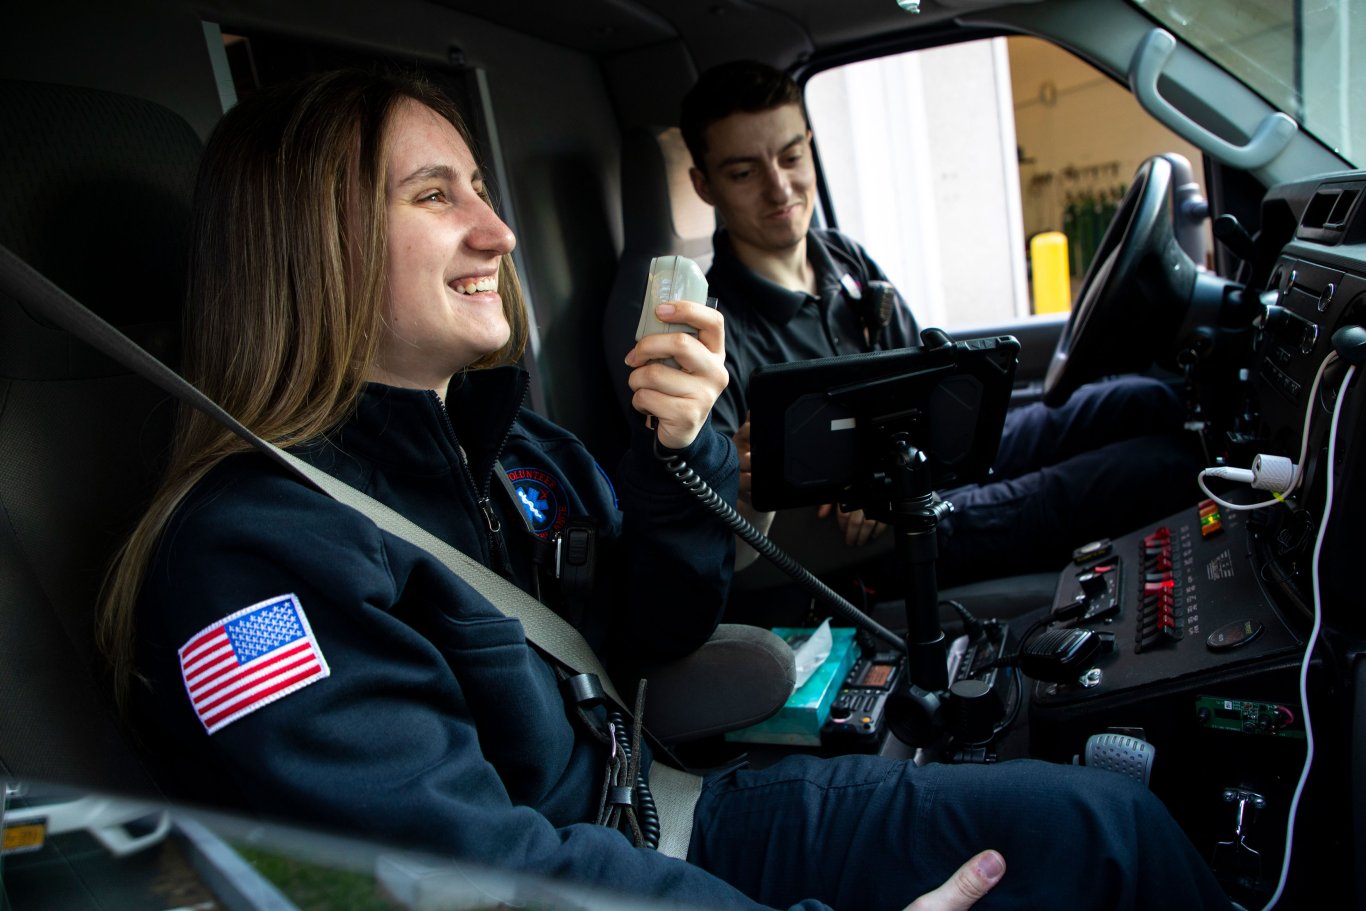 Two Five Quad crew members sit inside the front seat of the ambulance speaking on the handheld radio.